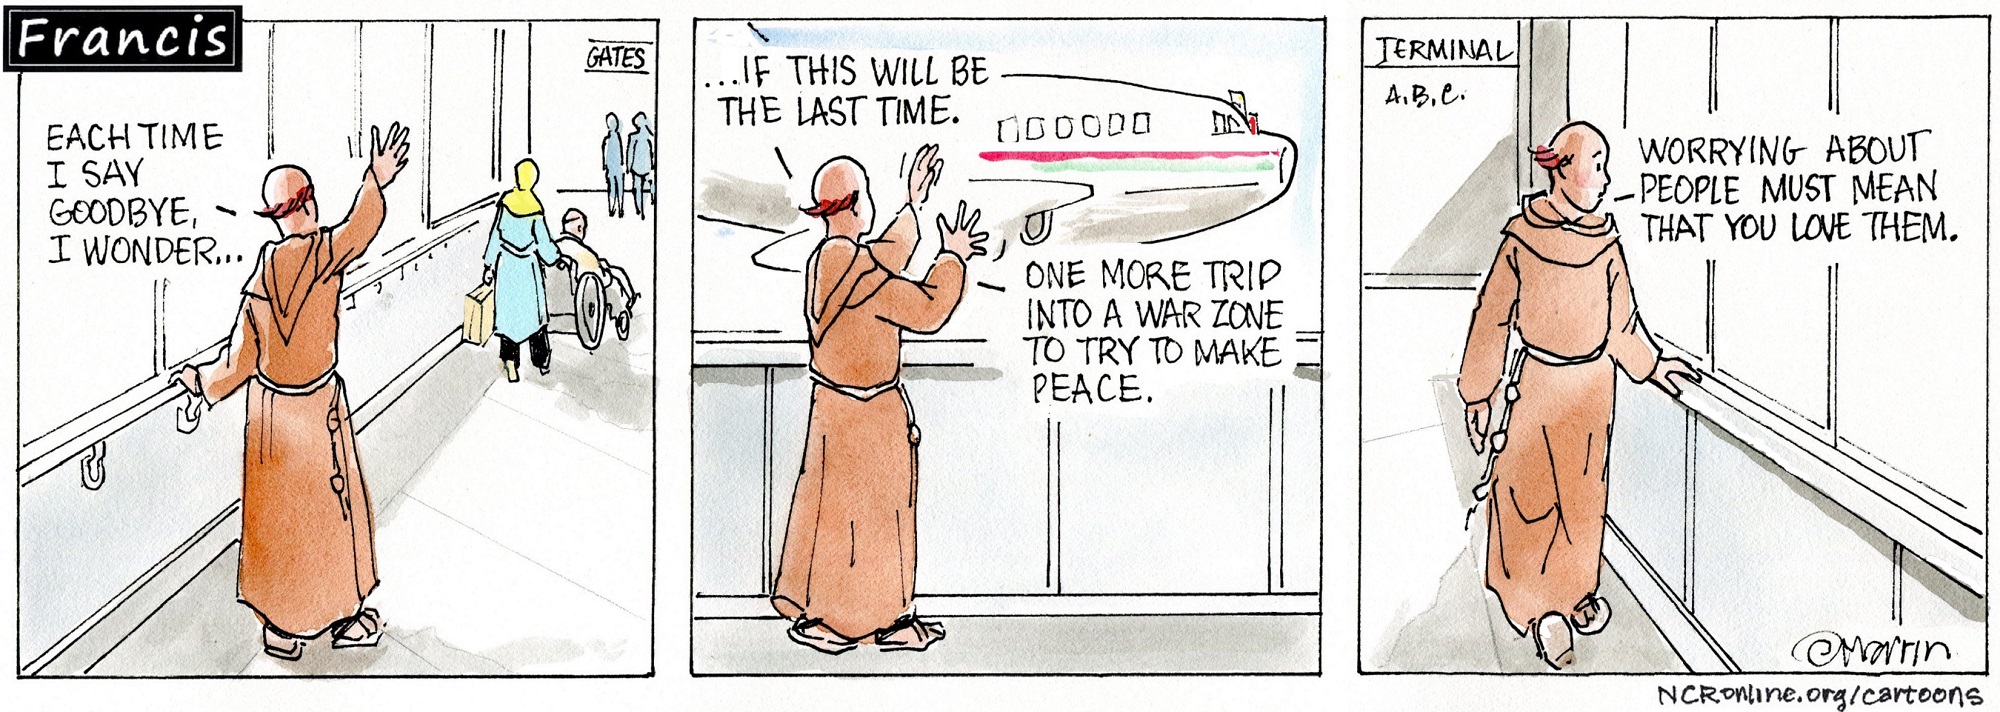 Francis, the comic strip: Brother Leo sends Francis off on another peacemaking pilgrimage.